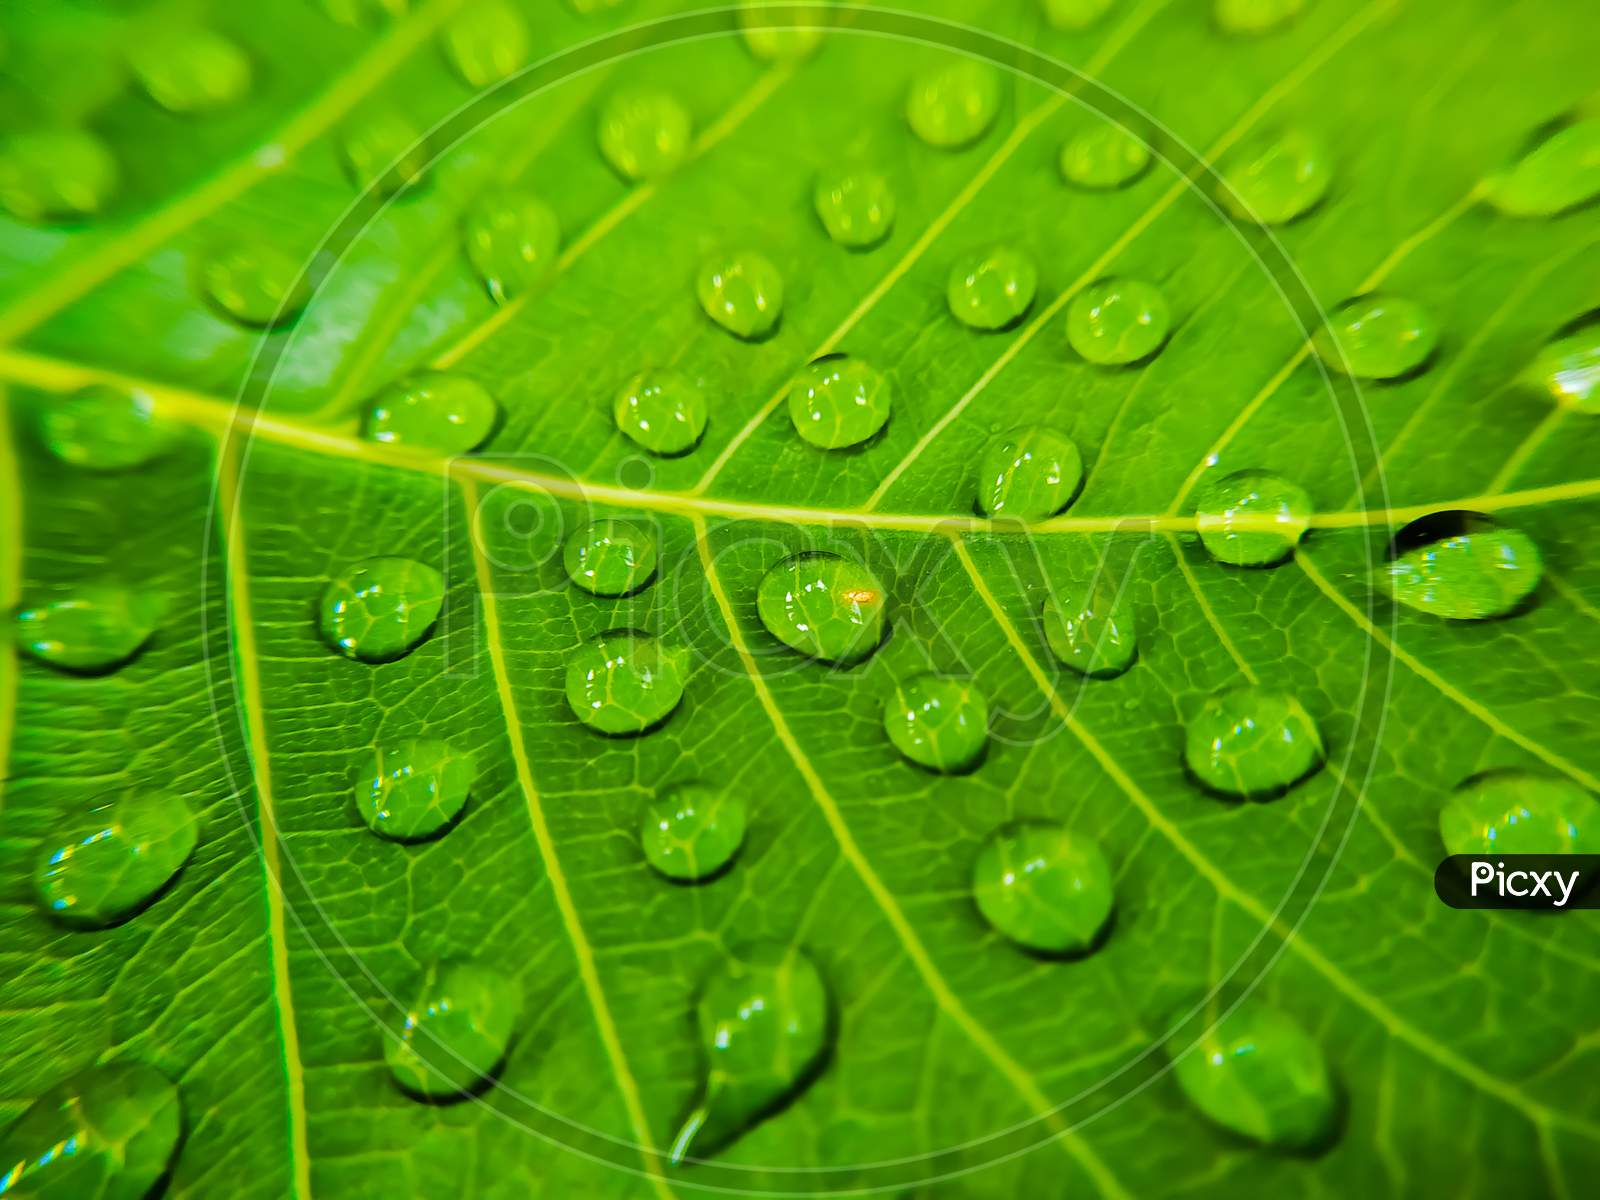 Water droplets on green bodhi leaf